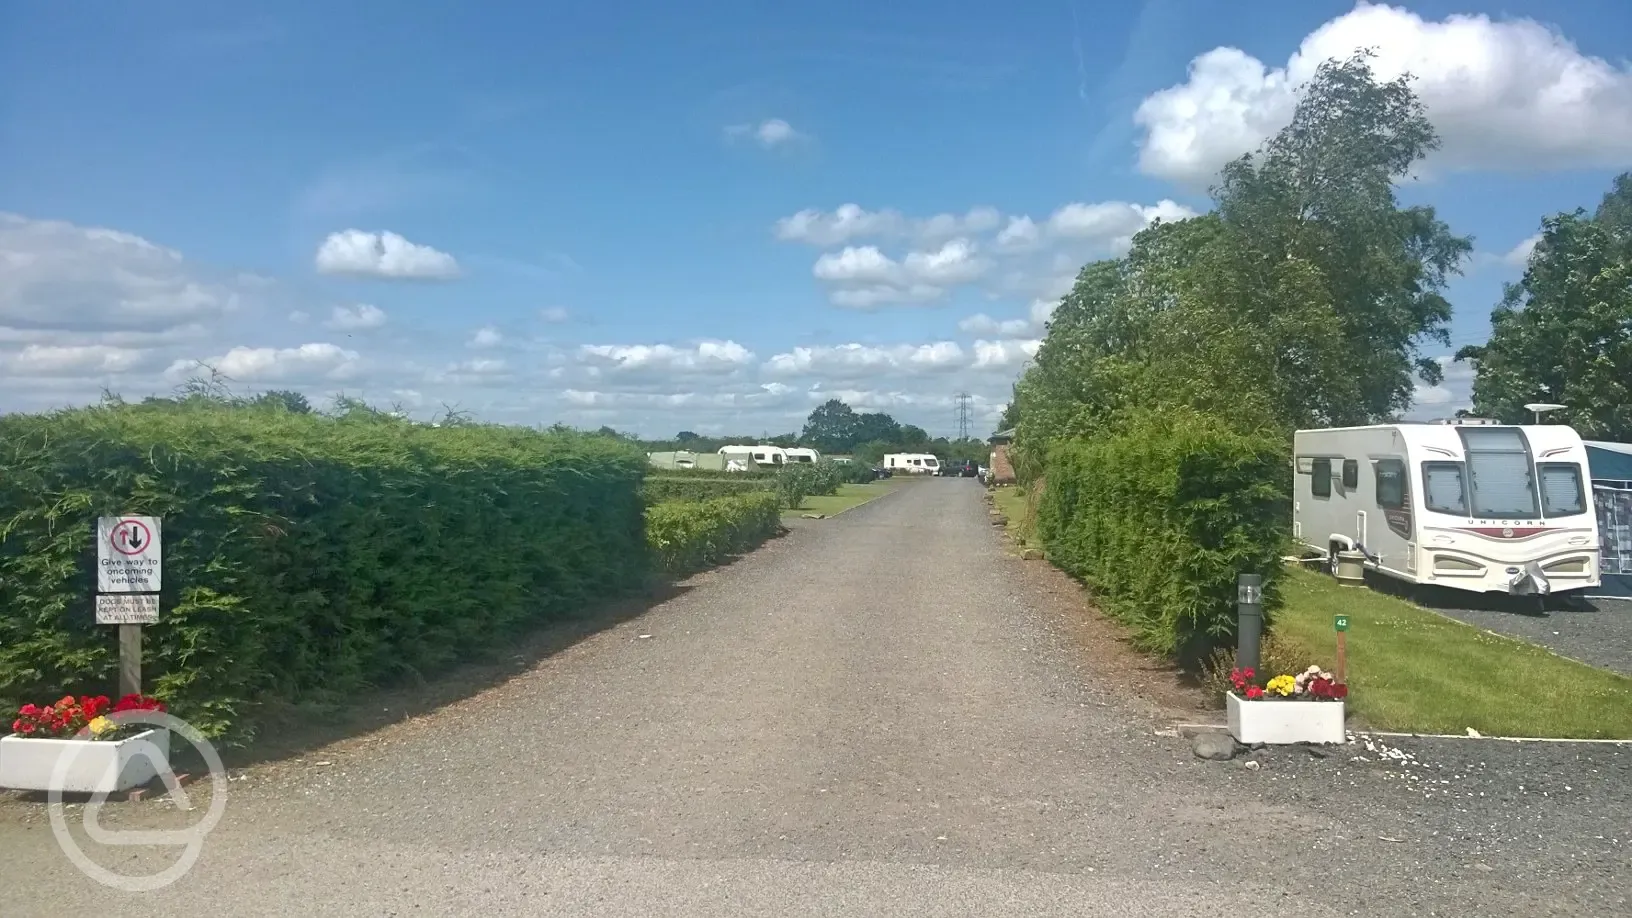 The view from the entrance barrier at York Caravan Park